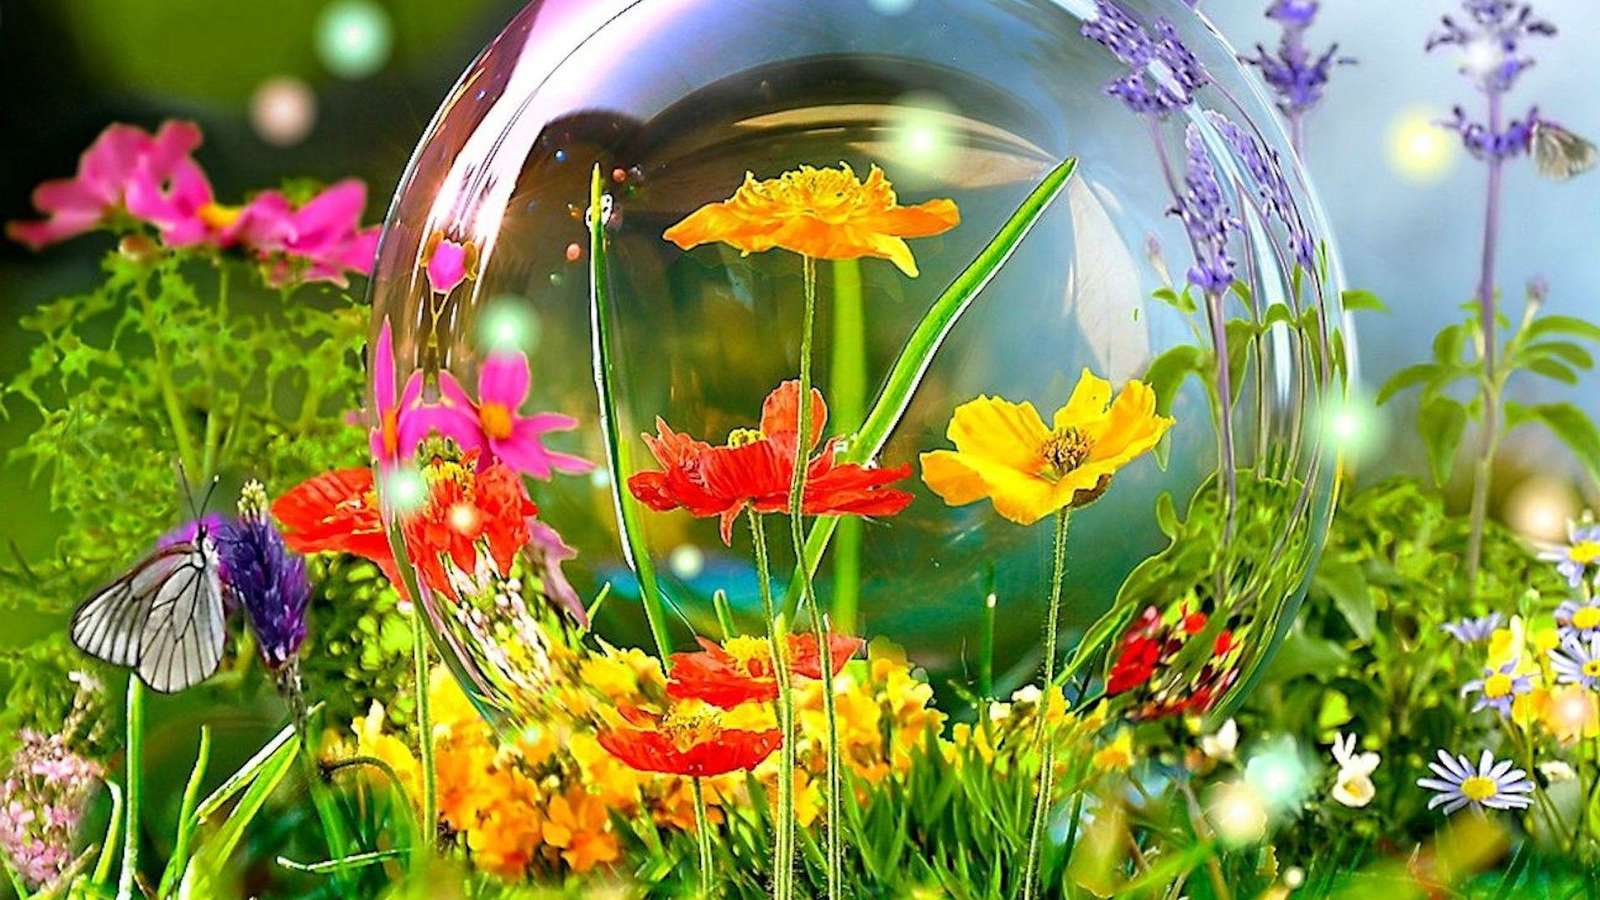 Flowers, flowers and a glass b jigsaw puzzle online